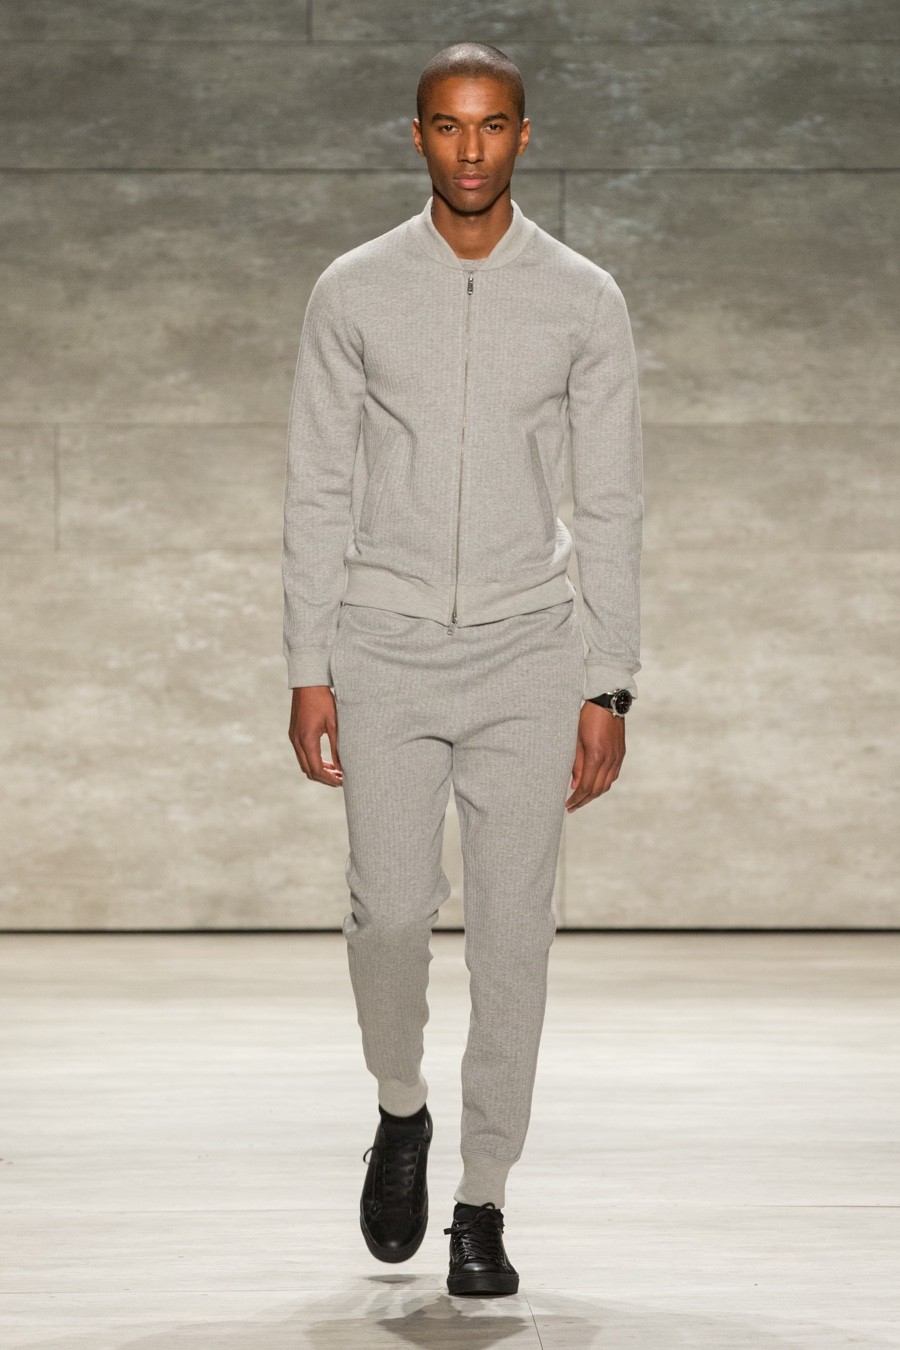 Todd Snyder Fall Winter 2015 Menswear Collection 034